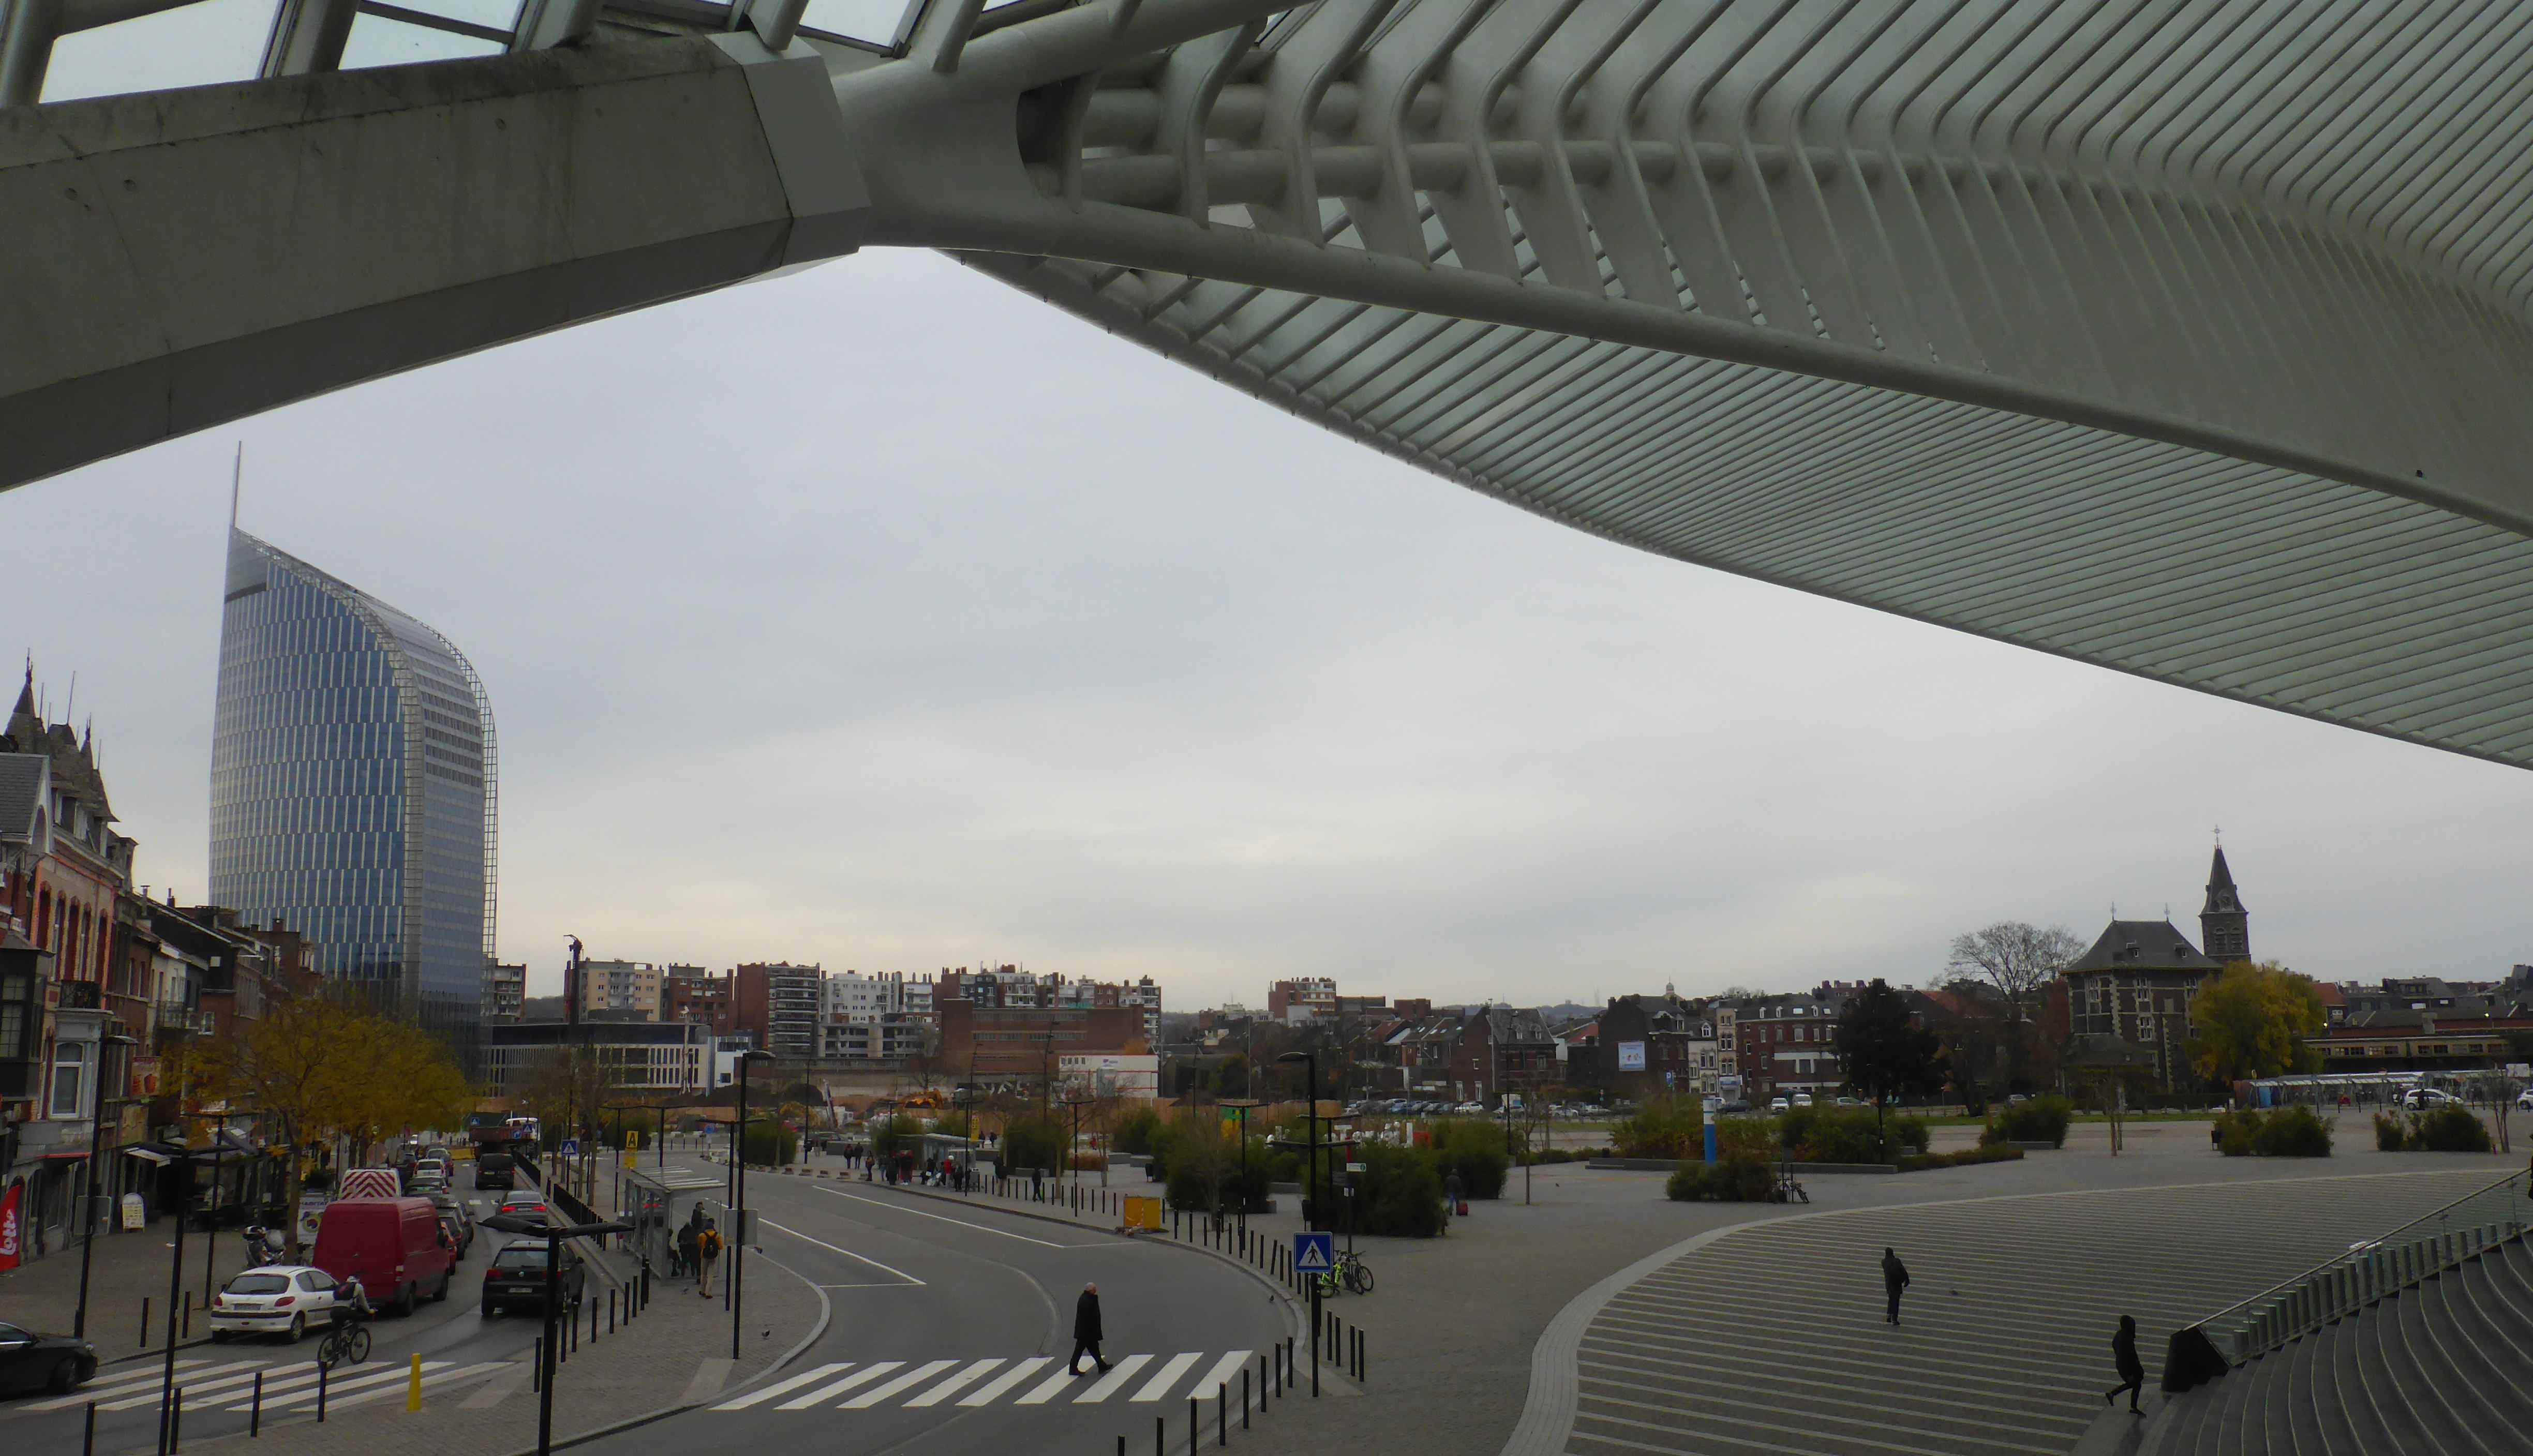 View from the main entrance of the Liège-Guillemins train station